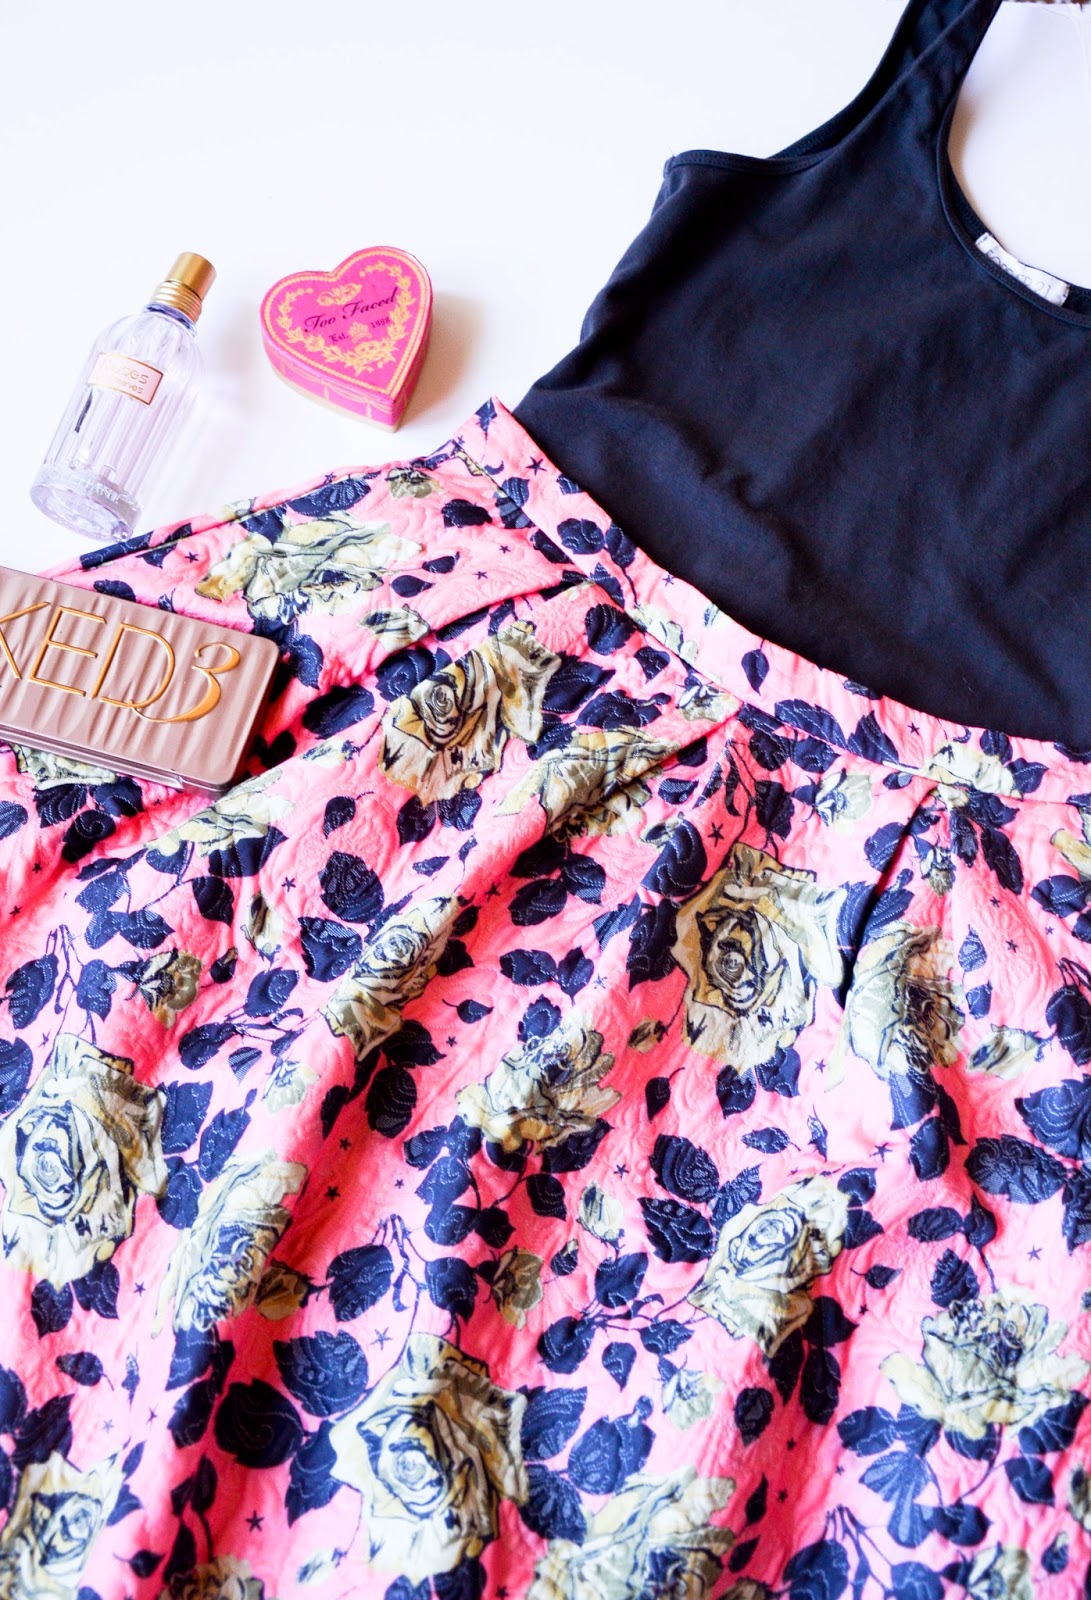 Beauty essentials: L'occitane roses perfume, Too faced heart shaped blush, Urban decay naked 3 eye shadow pallet, pink and gray floral midi skirt from forever21